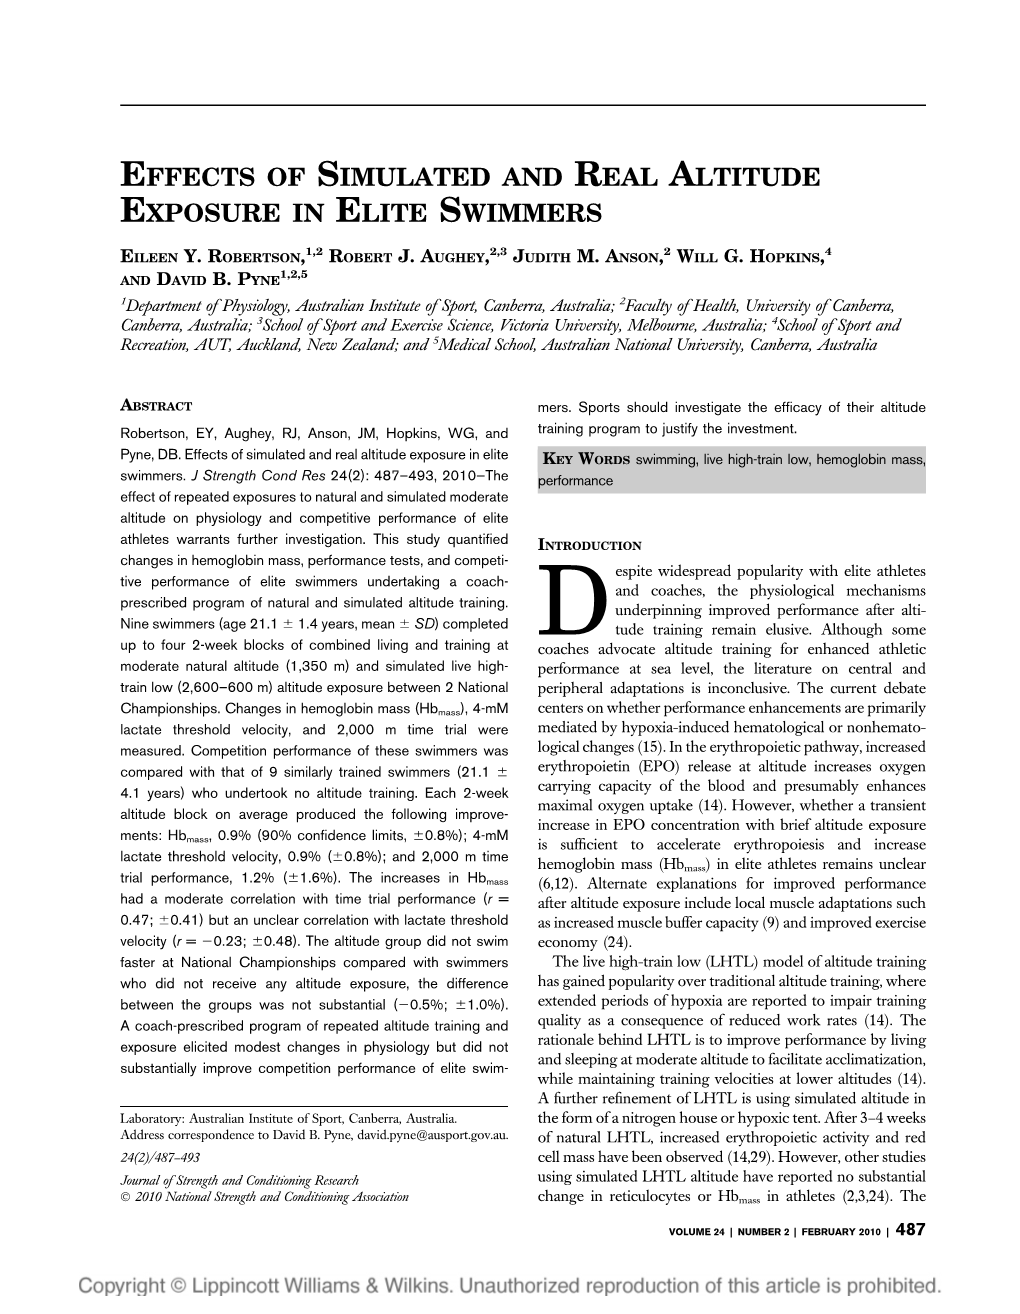 Effects of Simulated and Real Altitude Exposure in Elite Swimmers